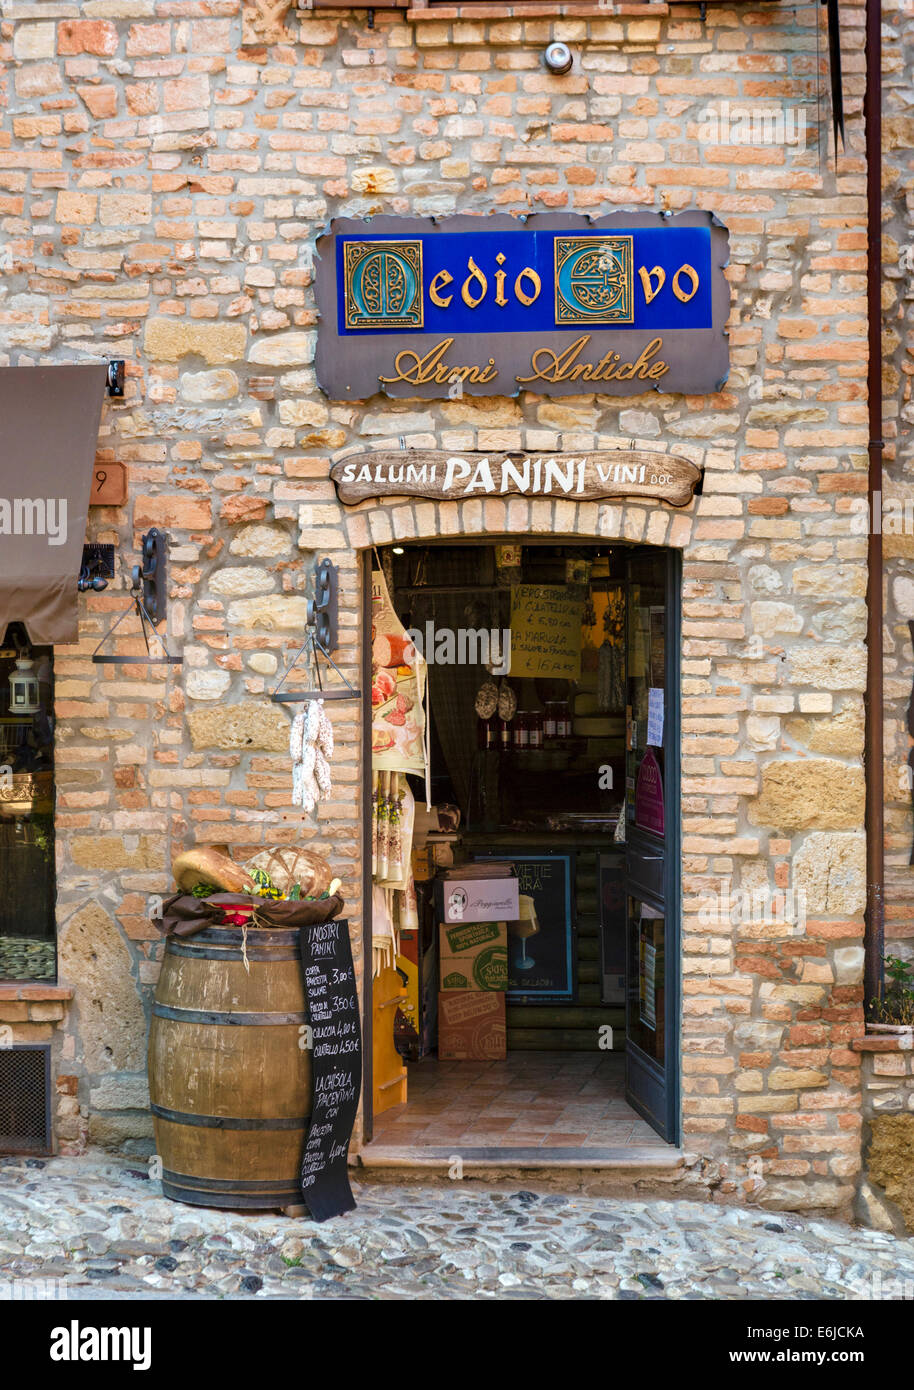 Tradional shop selling bread, wine and meats in centre of medieval old town of Castell'Arquato, Piacenza, Emilia Romagna, Italy Stock Photo